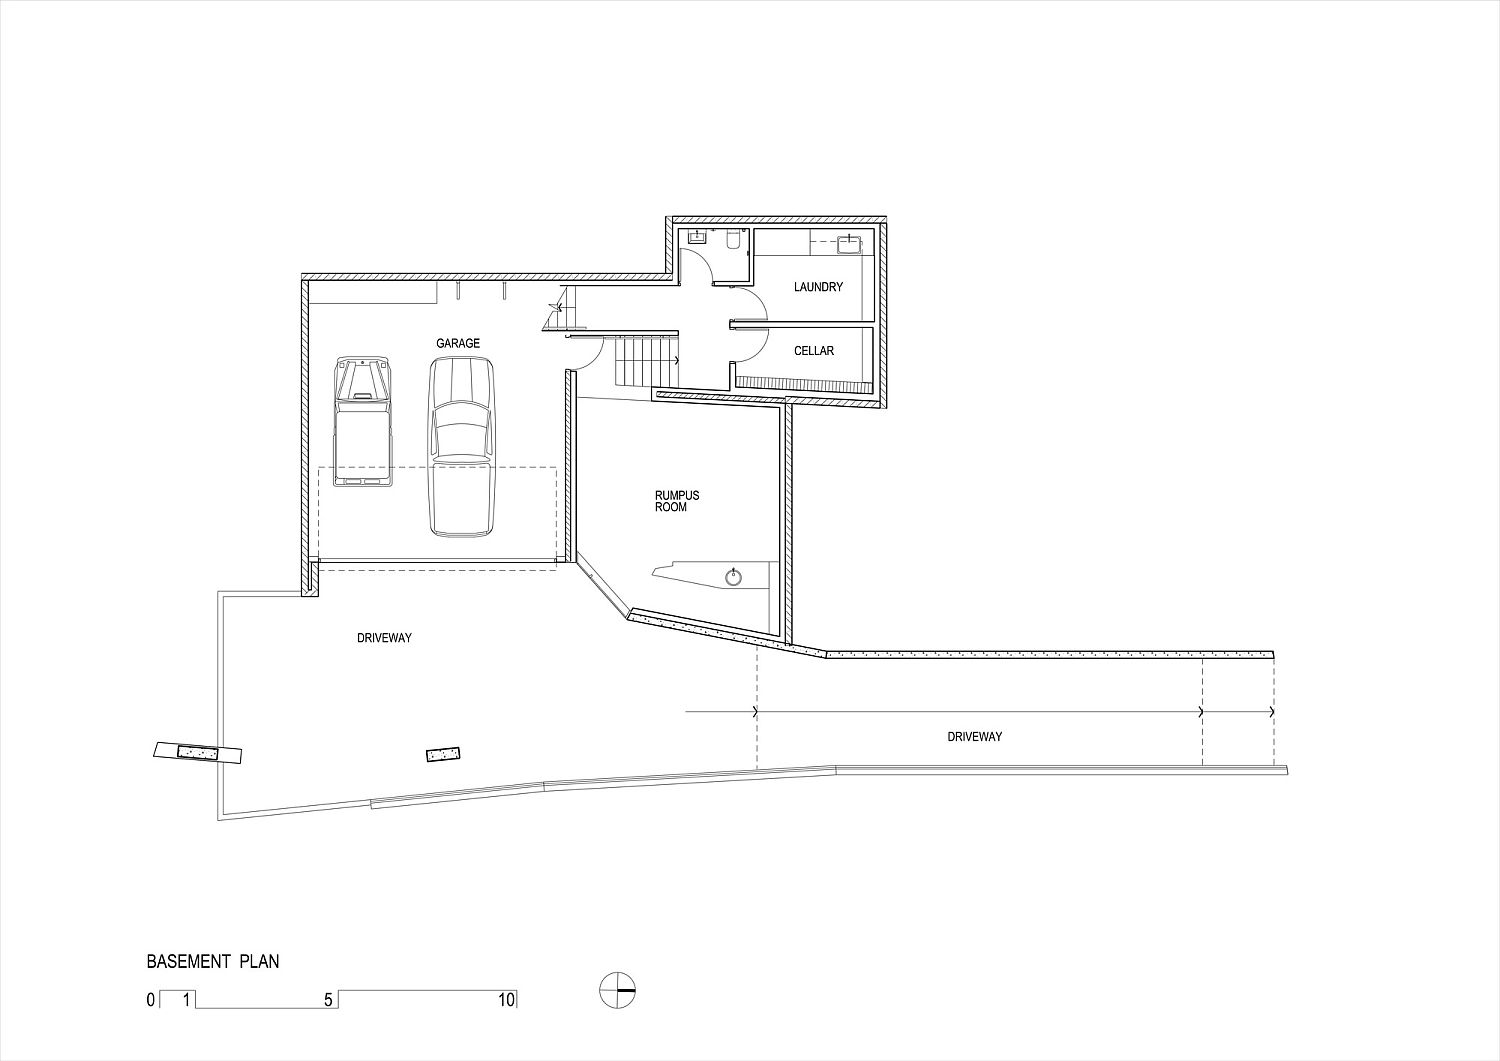 Basement floor plan with laundry, garage and utility rooms